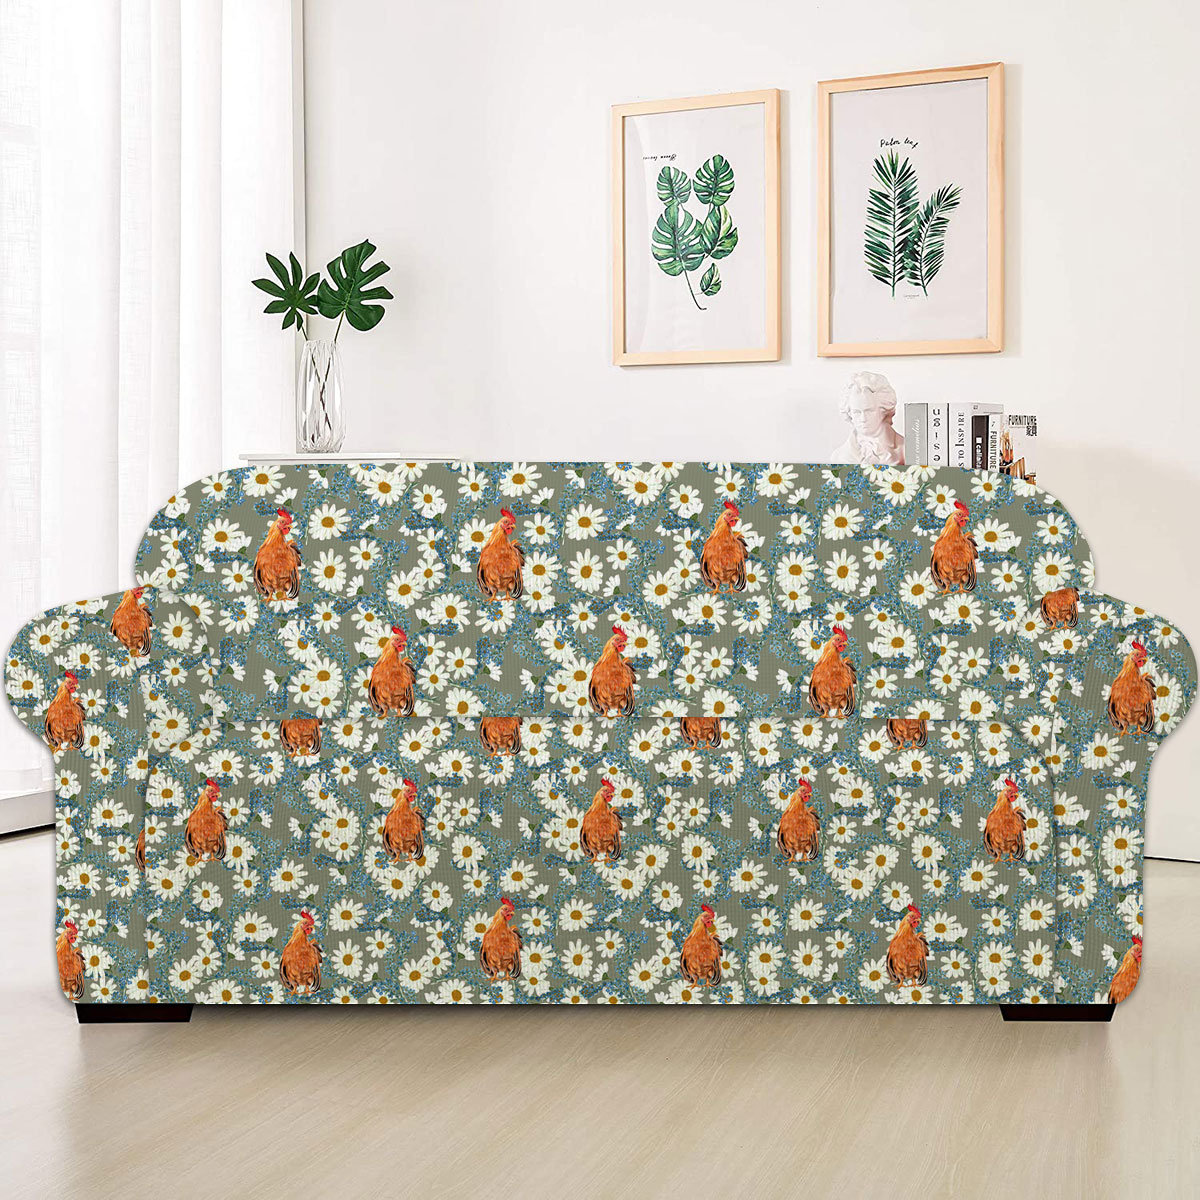 Chicken Camomilles Flower Grey Pattern Sofa Cover